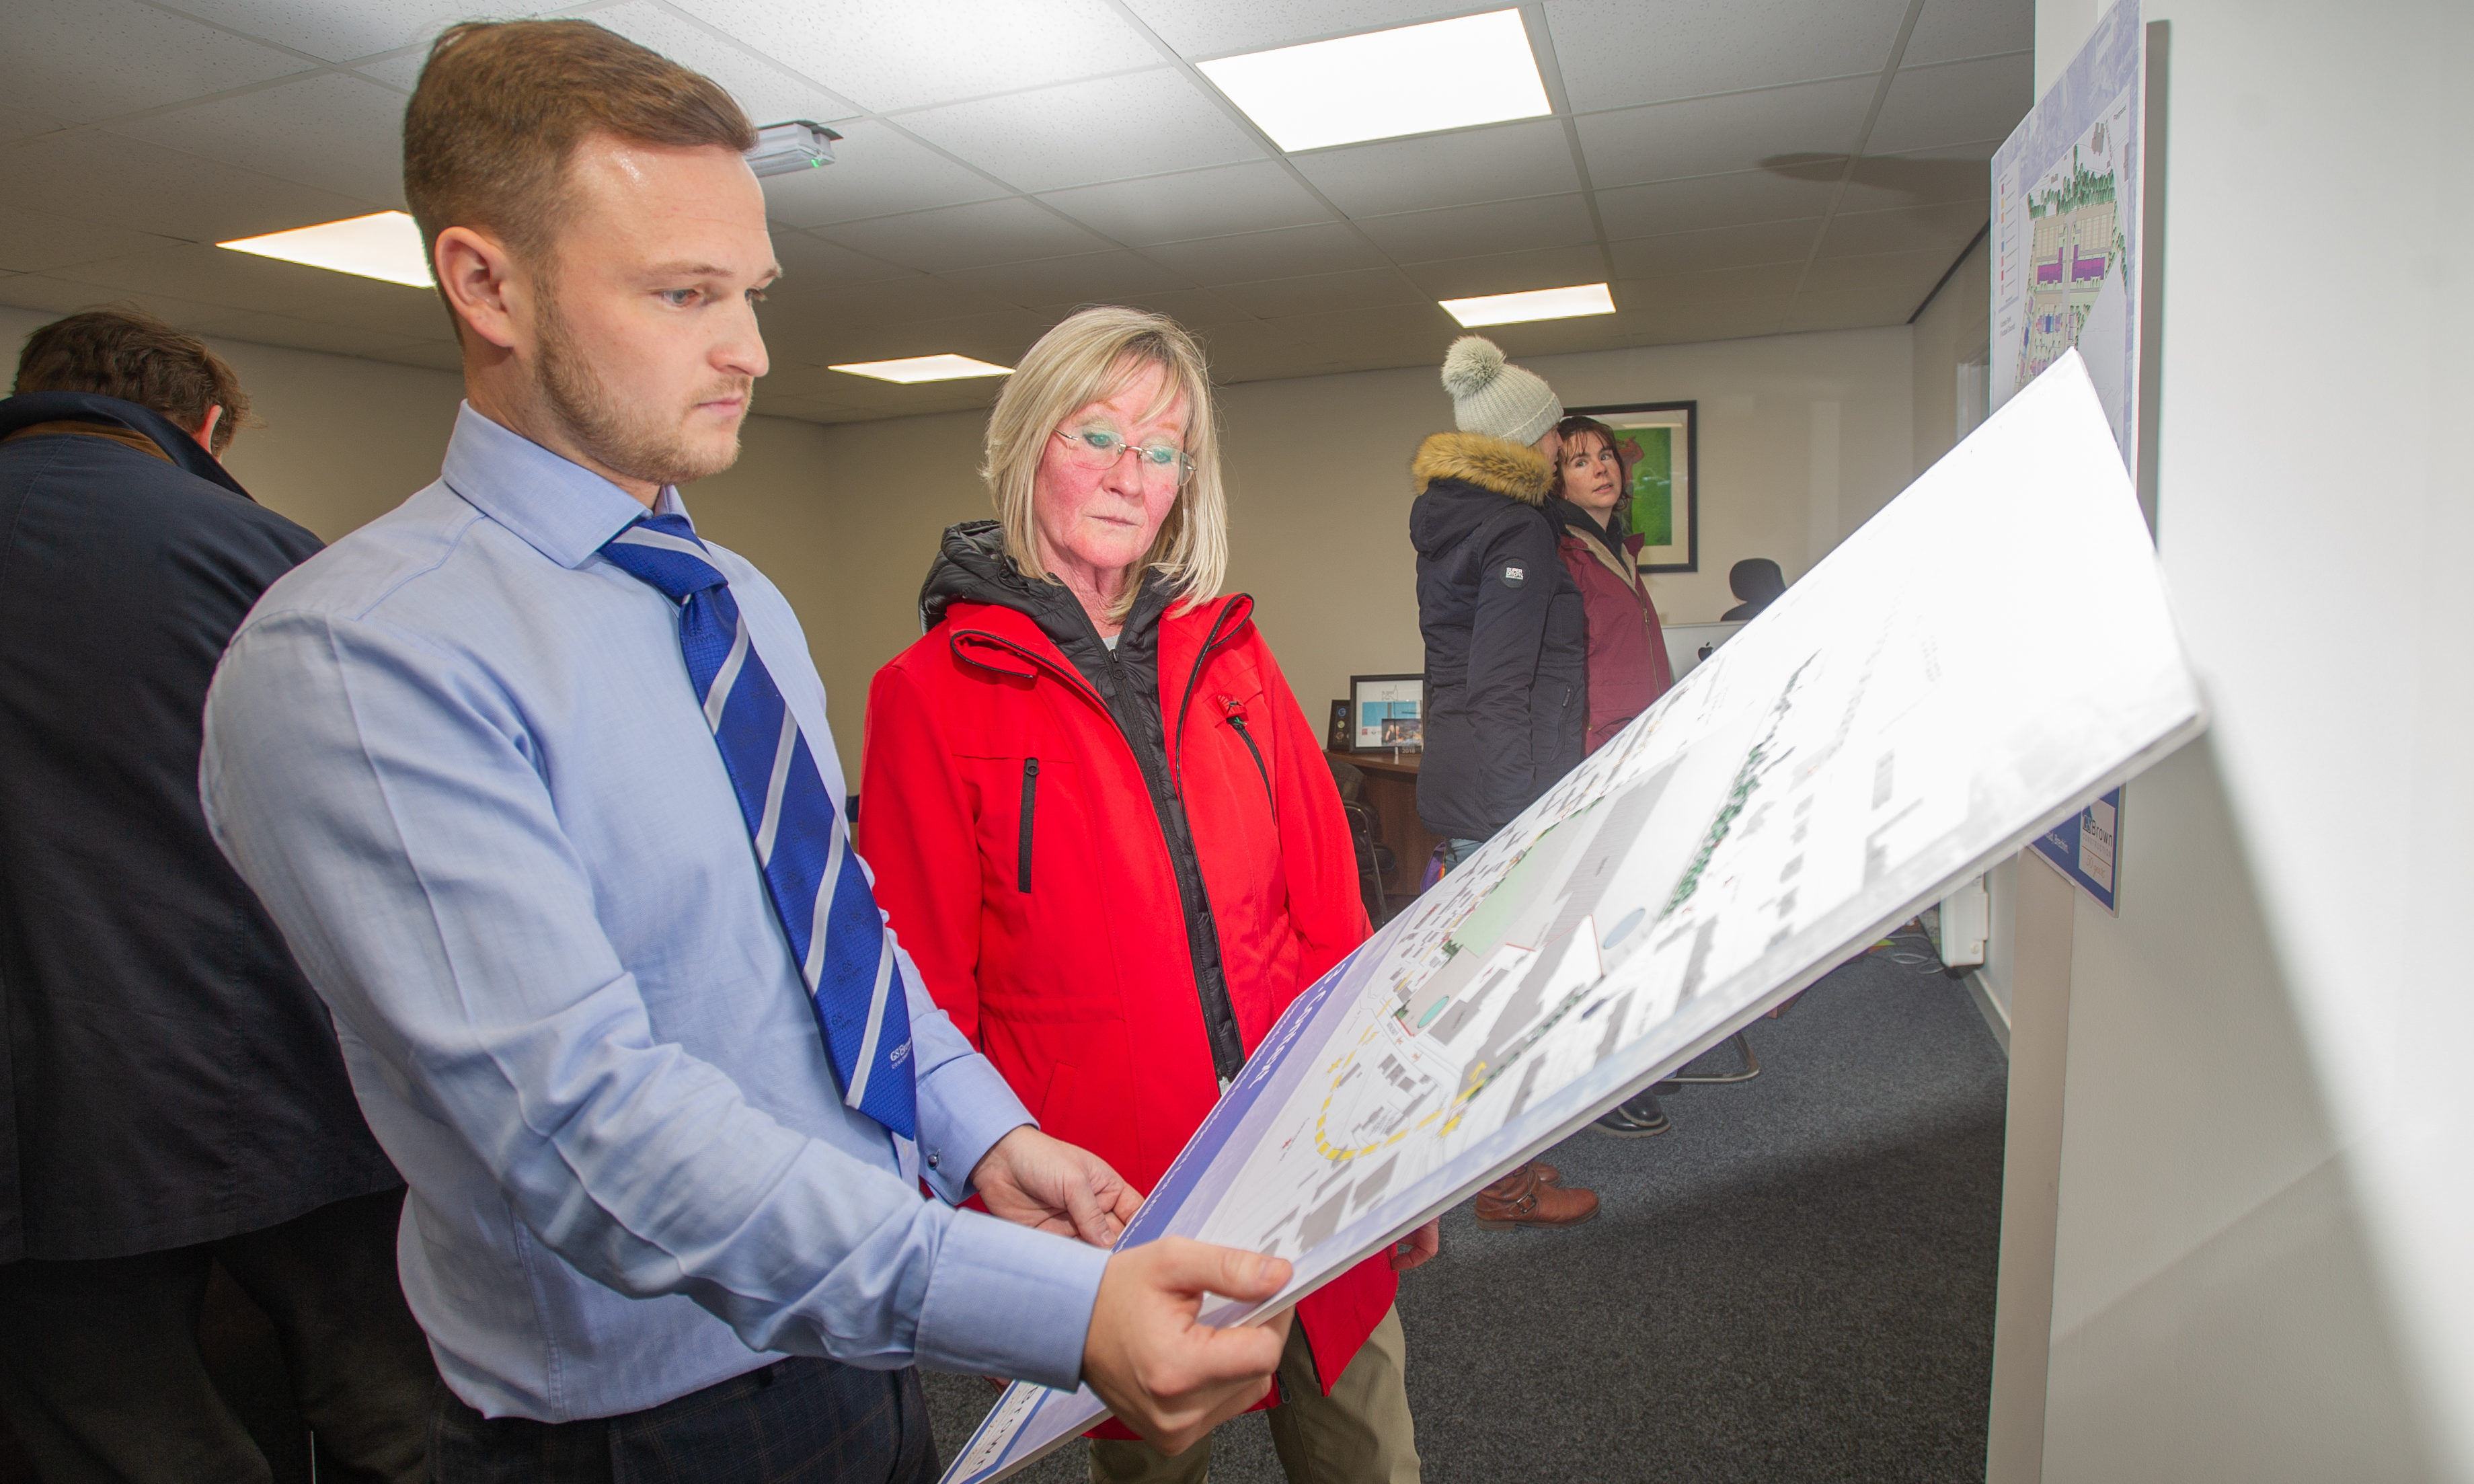 L to r - Ryan Brown (Land Manager GS Brown) and visitor to the event outling the proposals, Lorna Pattison, Mackie Motors, Clerk Street, Brechin, 15th January 2020, Kim Cessford / DCT Media.